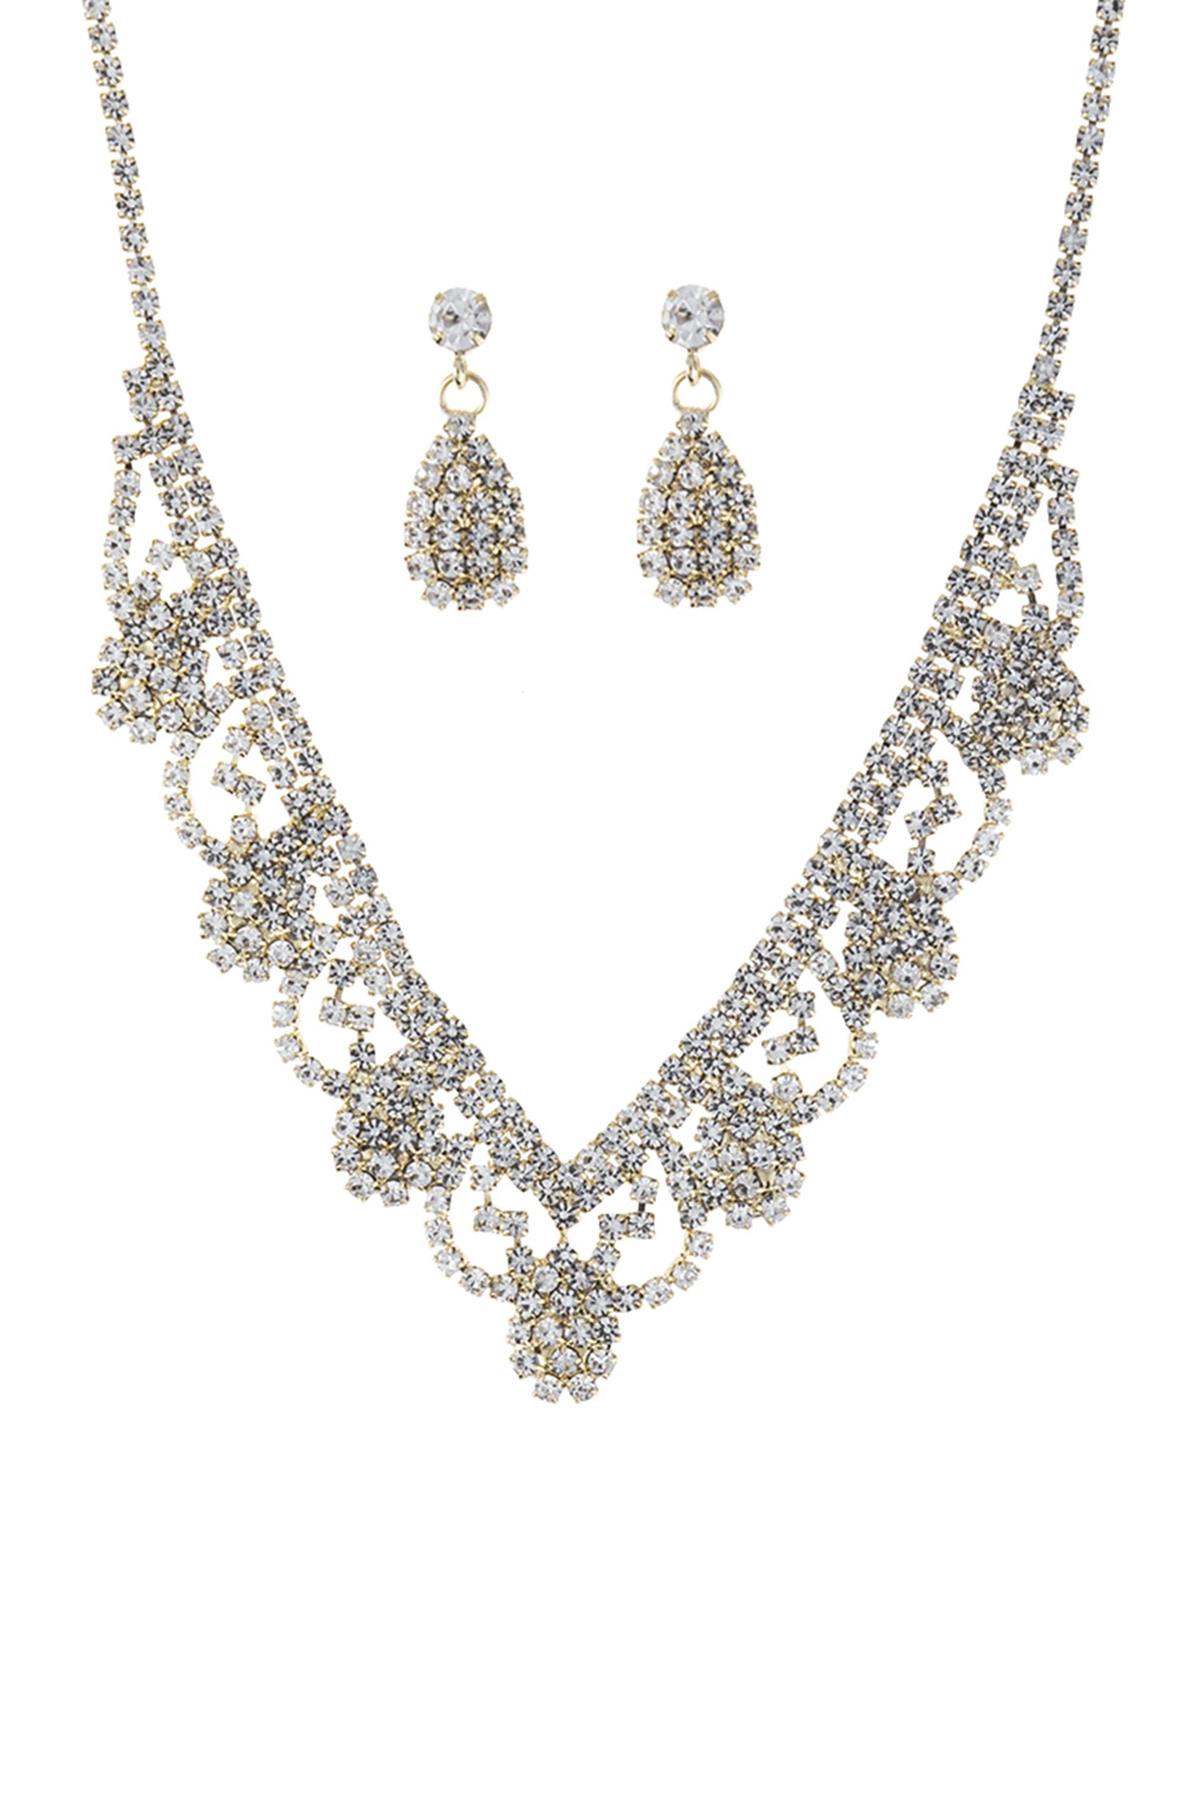 RHINESTONE PARTY EARRING AND NECKLACE SET